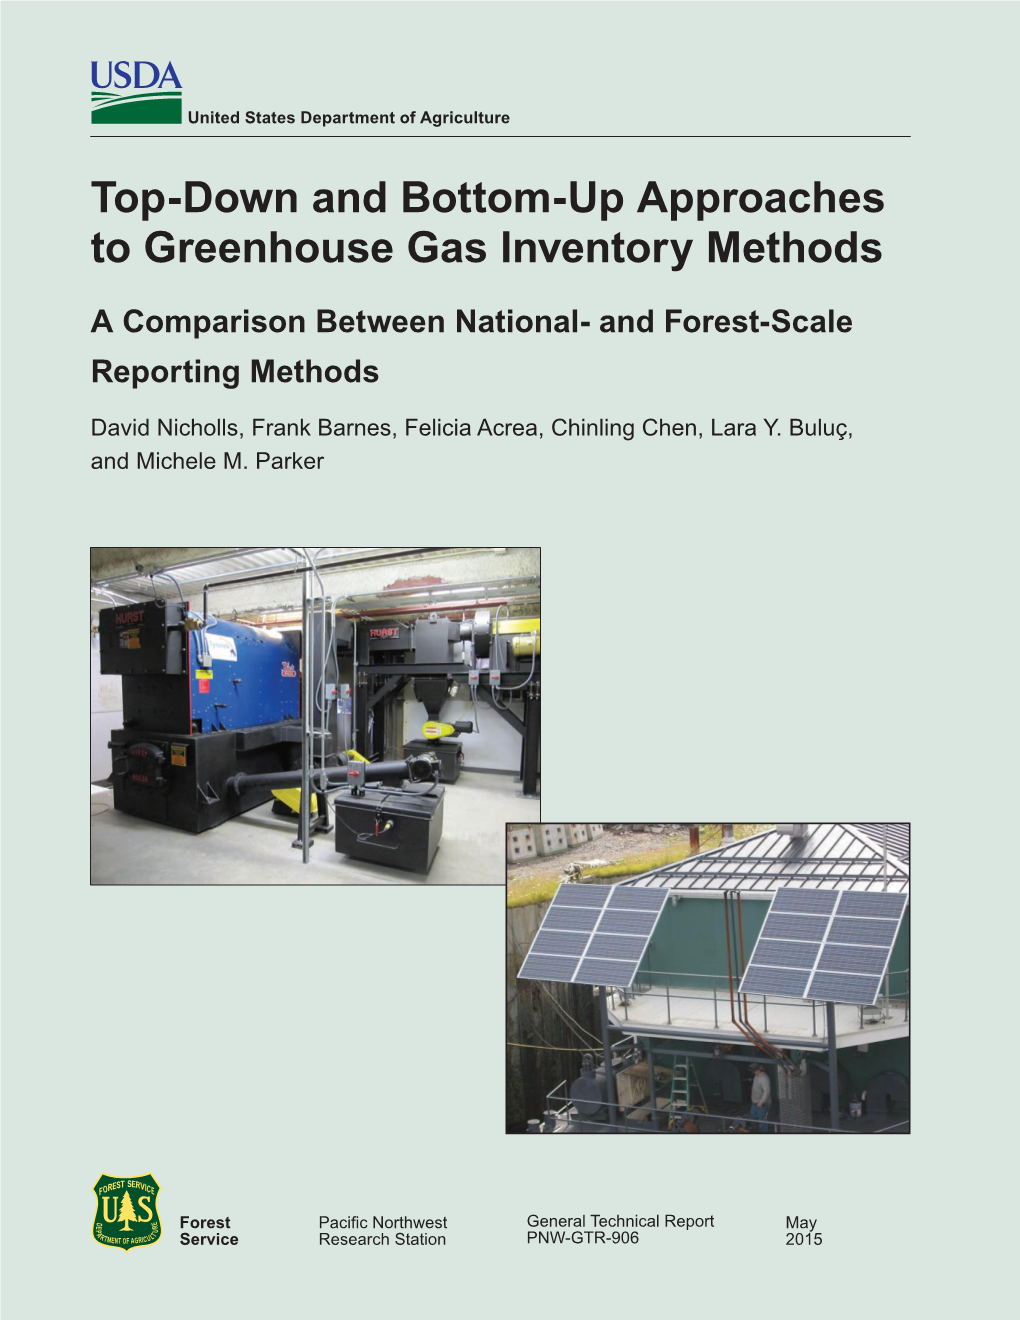 Top-Down and Bottom-Up Approaches to Greenhouse Gas Inventory Methods